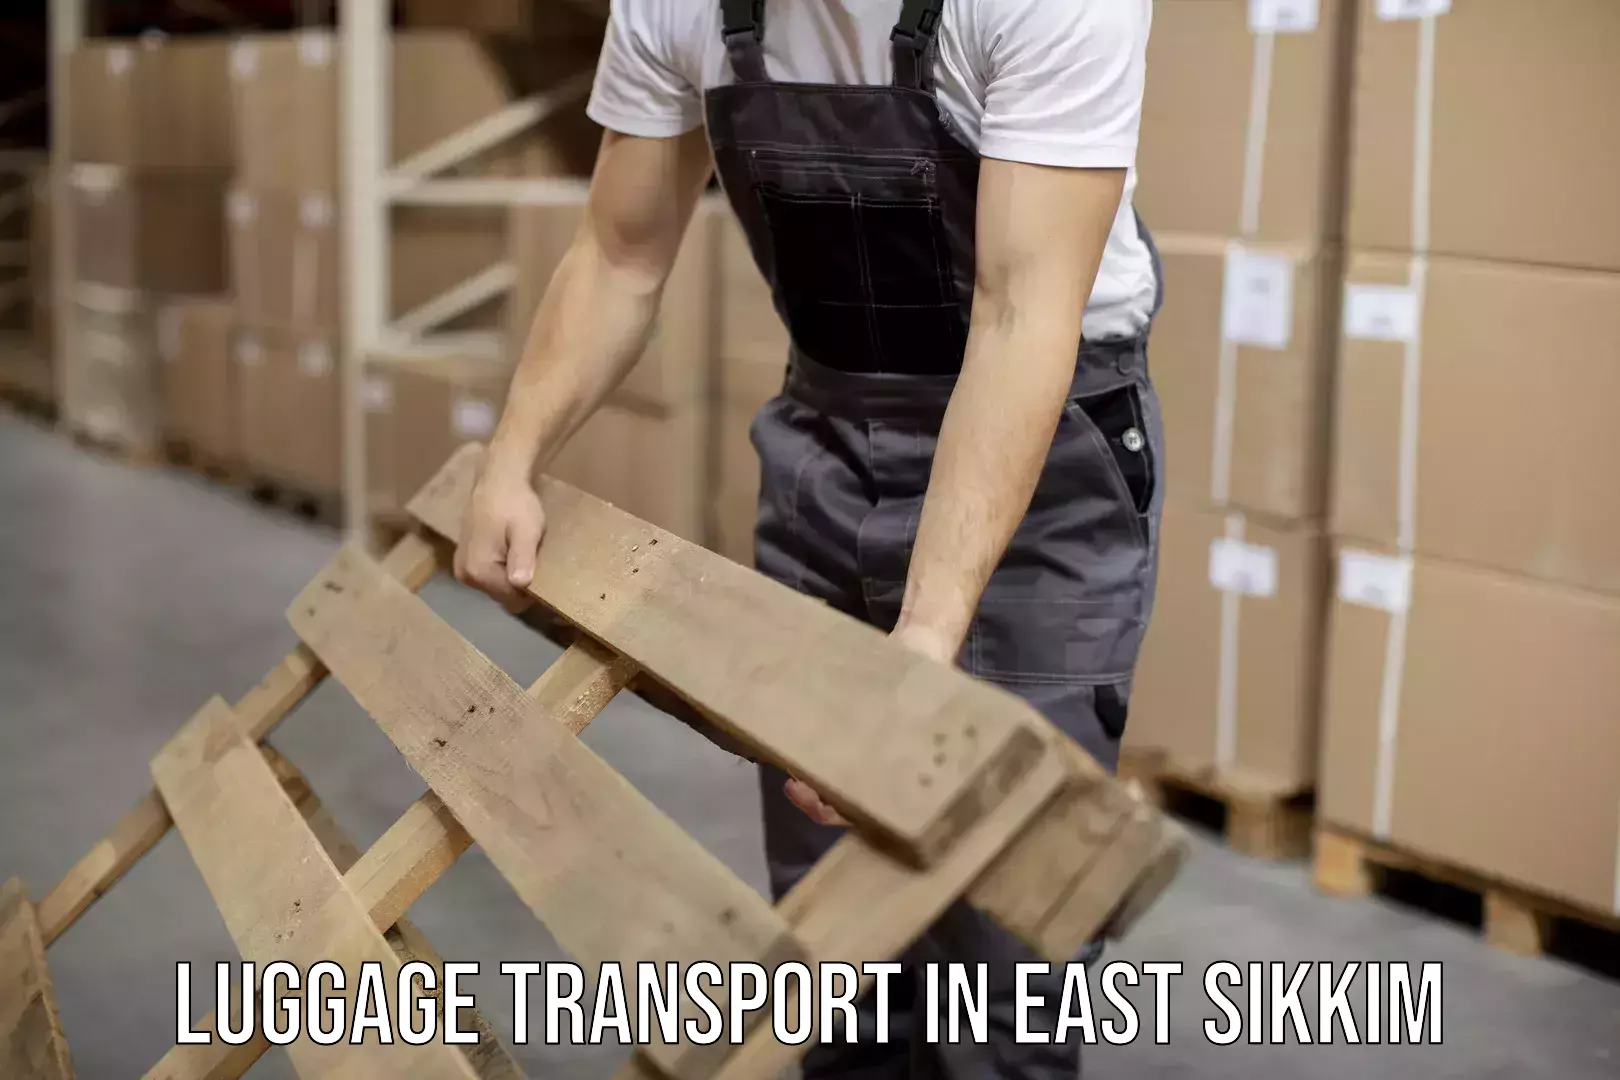 Luggage shipping efficiency in East Sikkim